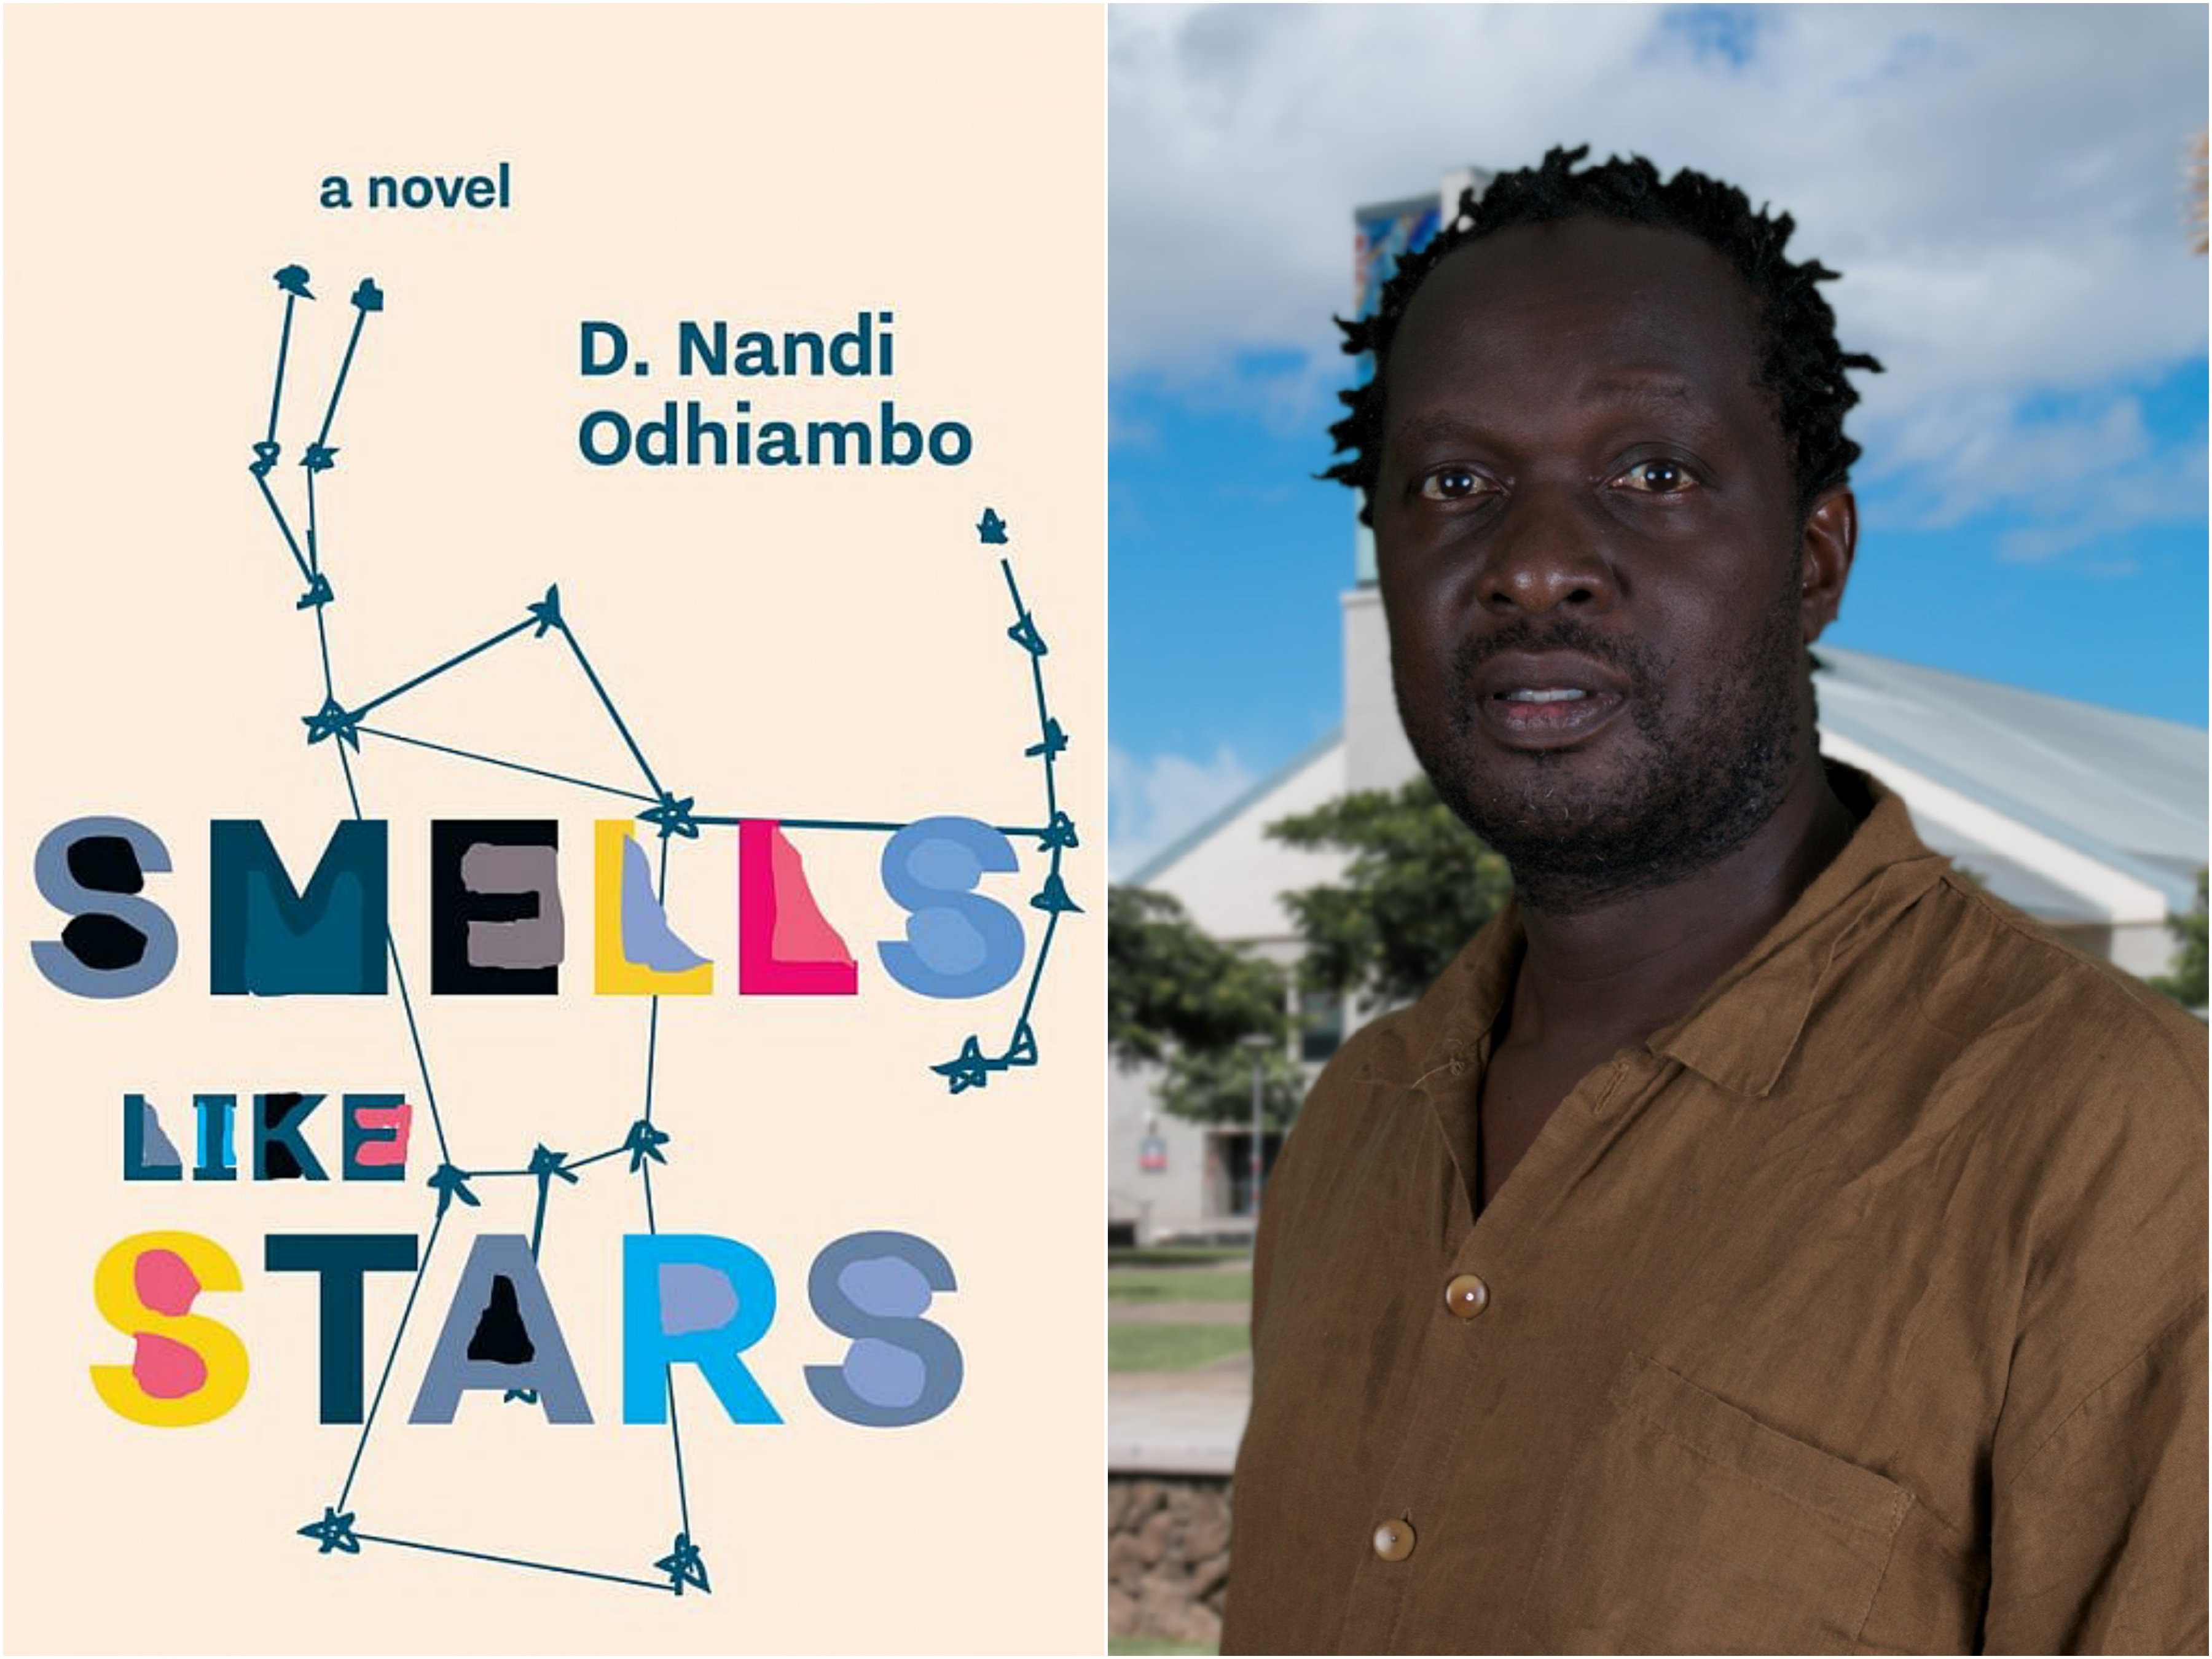 photos of the cover of Smells Like Stars and D. Nandi Odhiambo